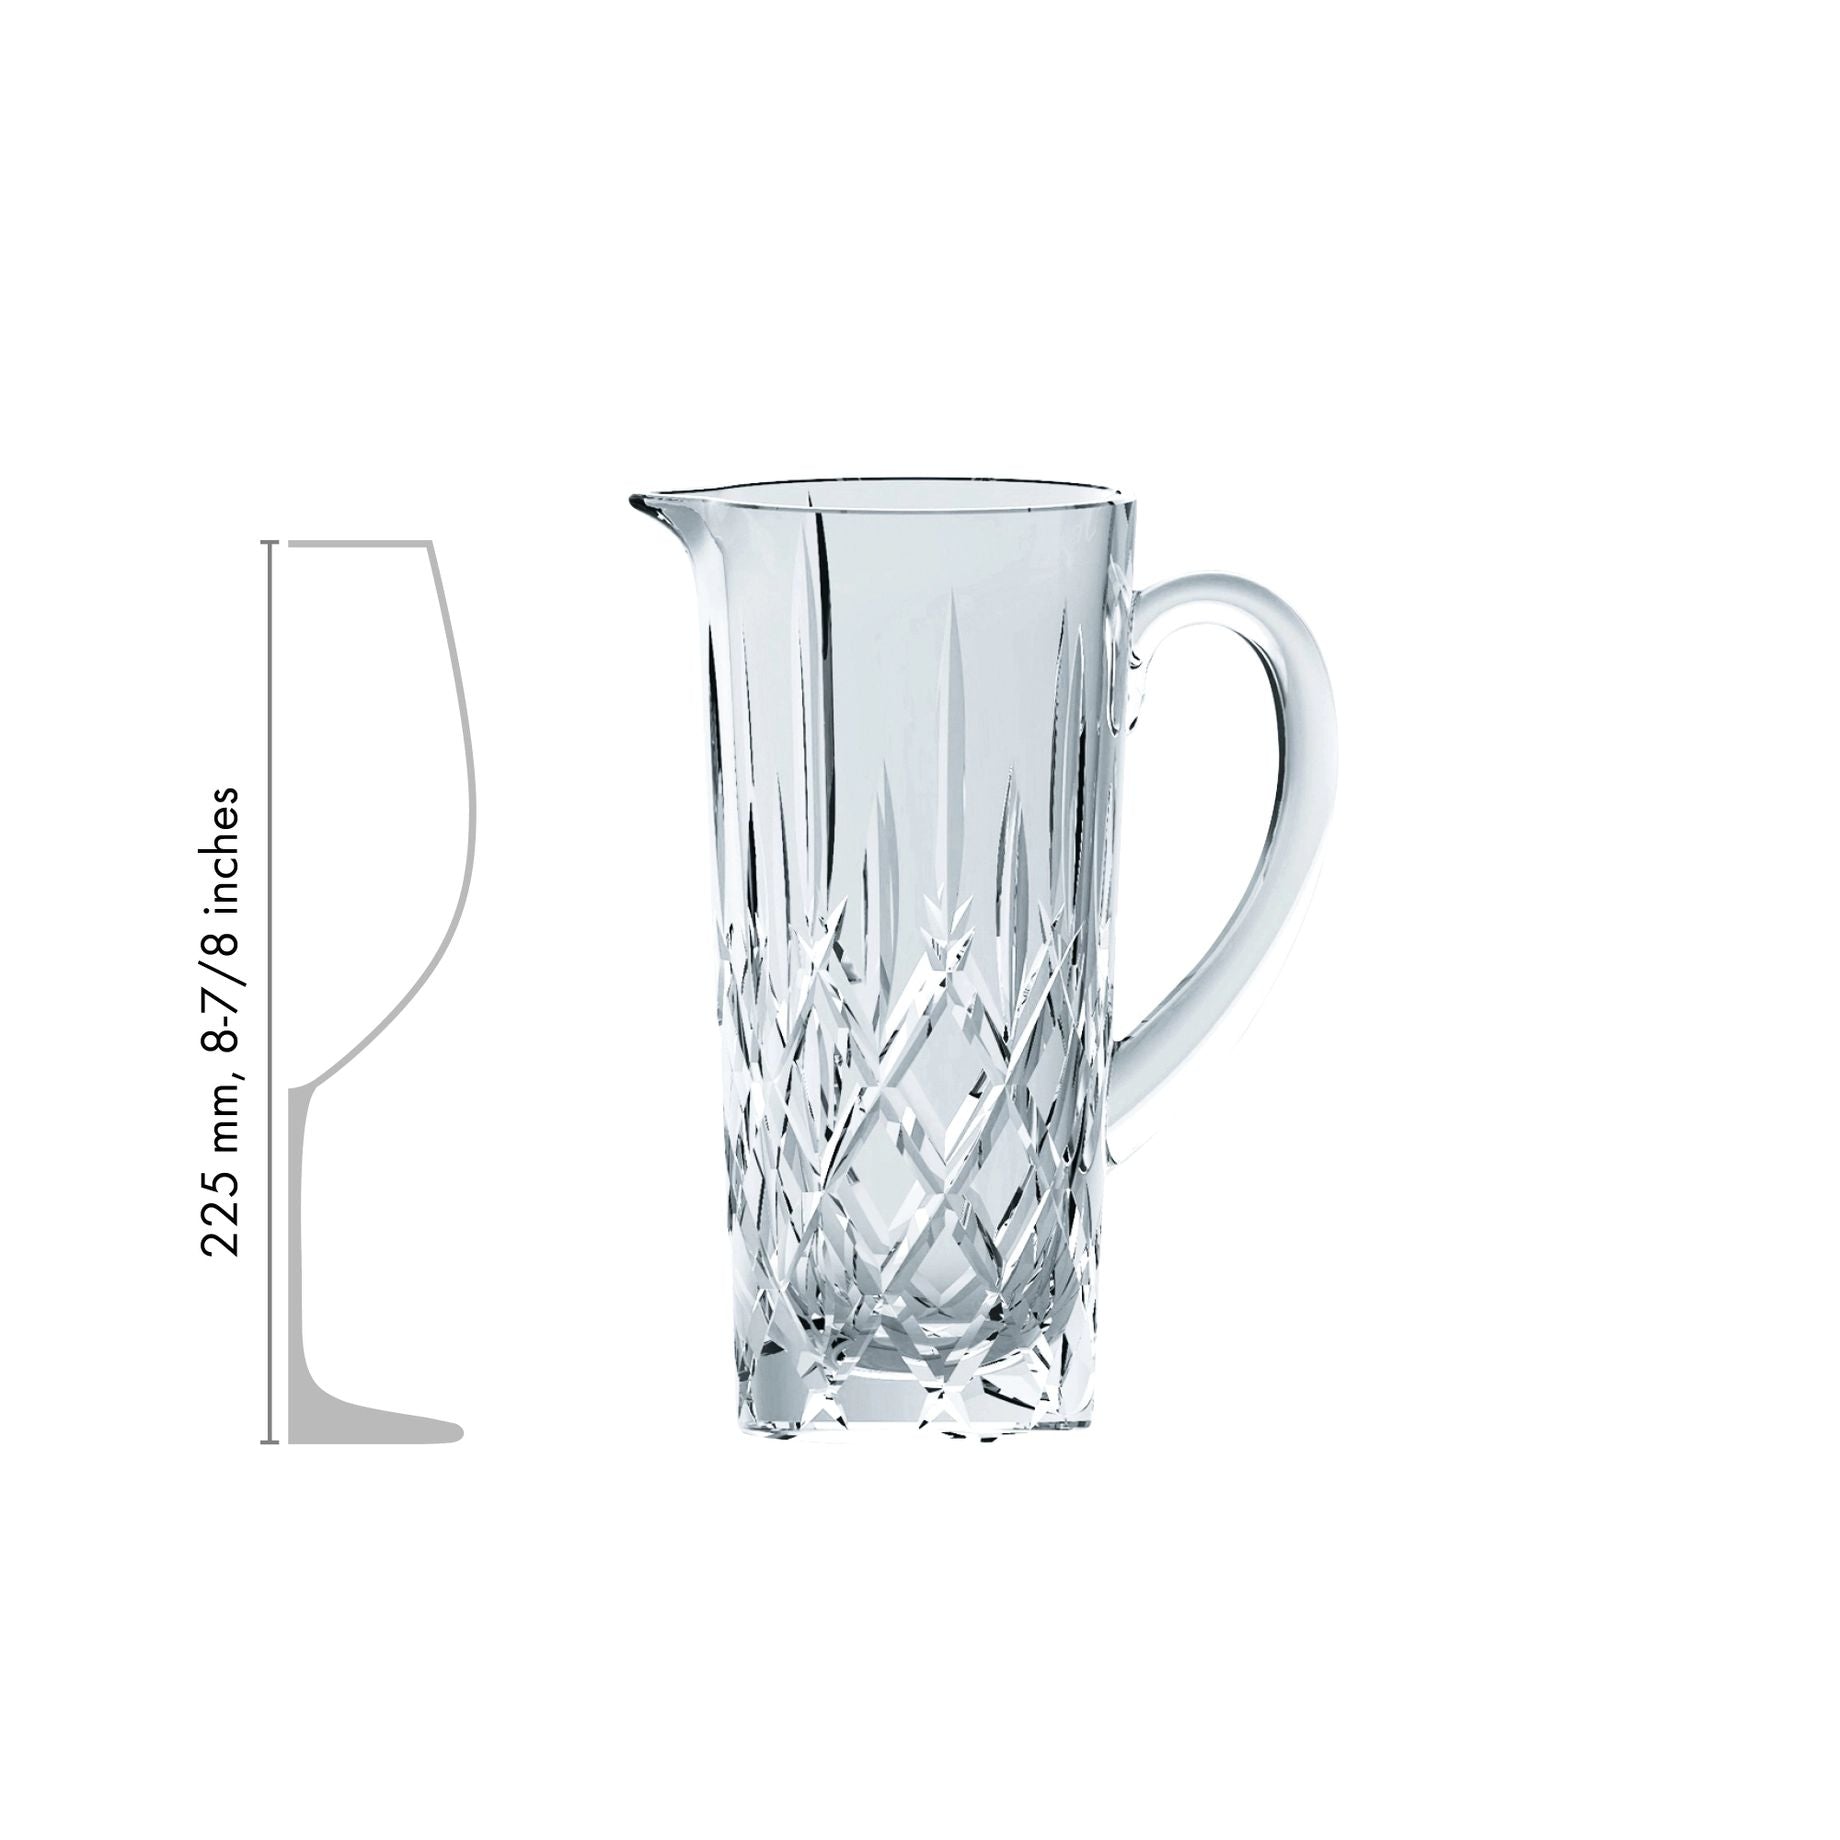 Noblesse Pitcher